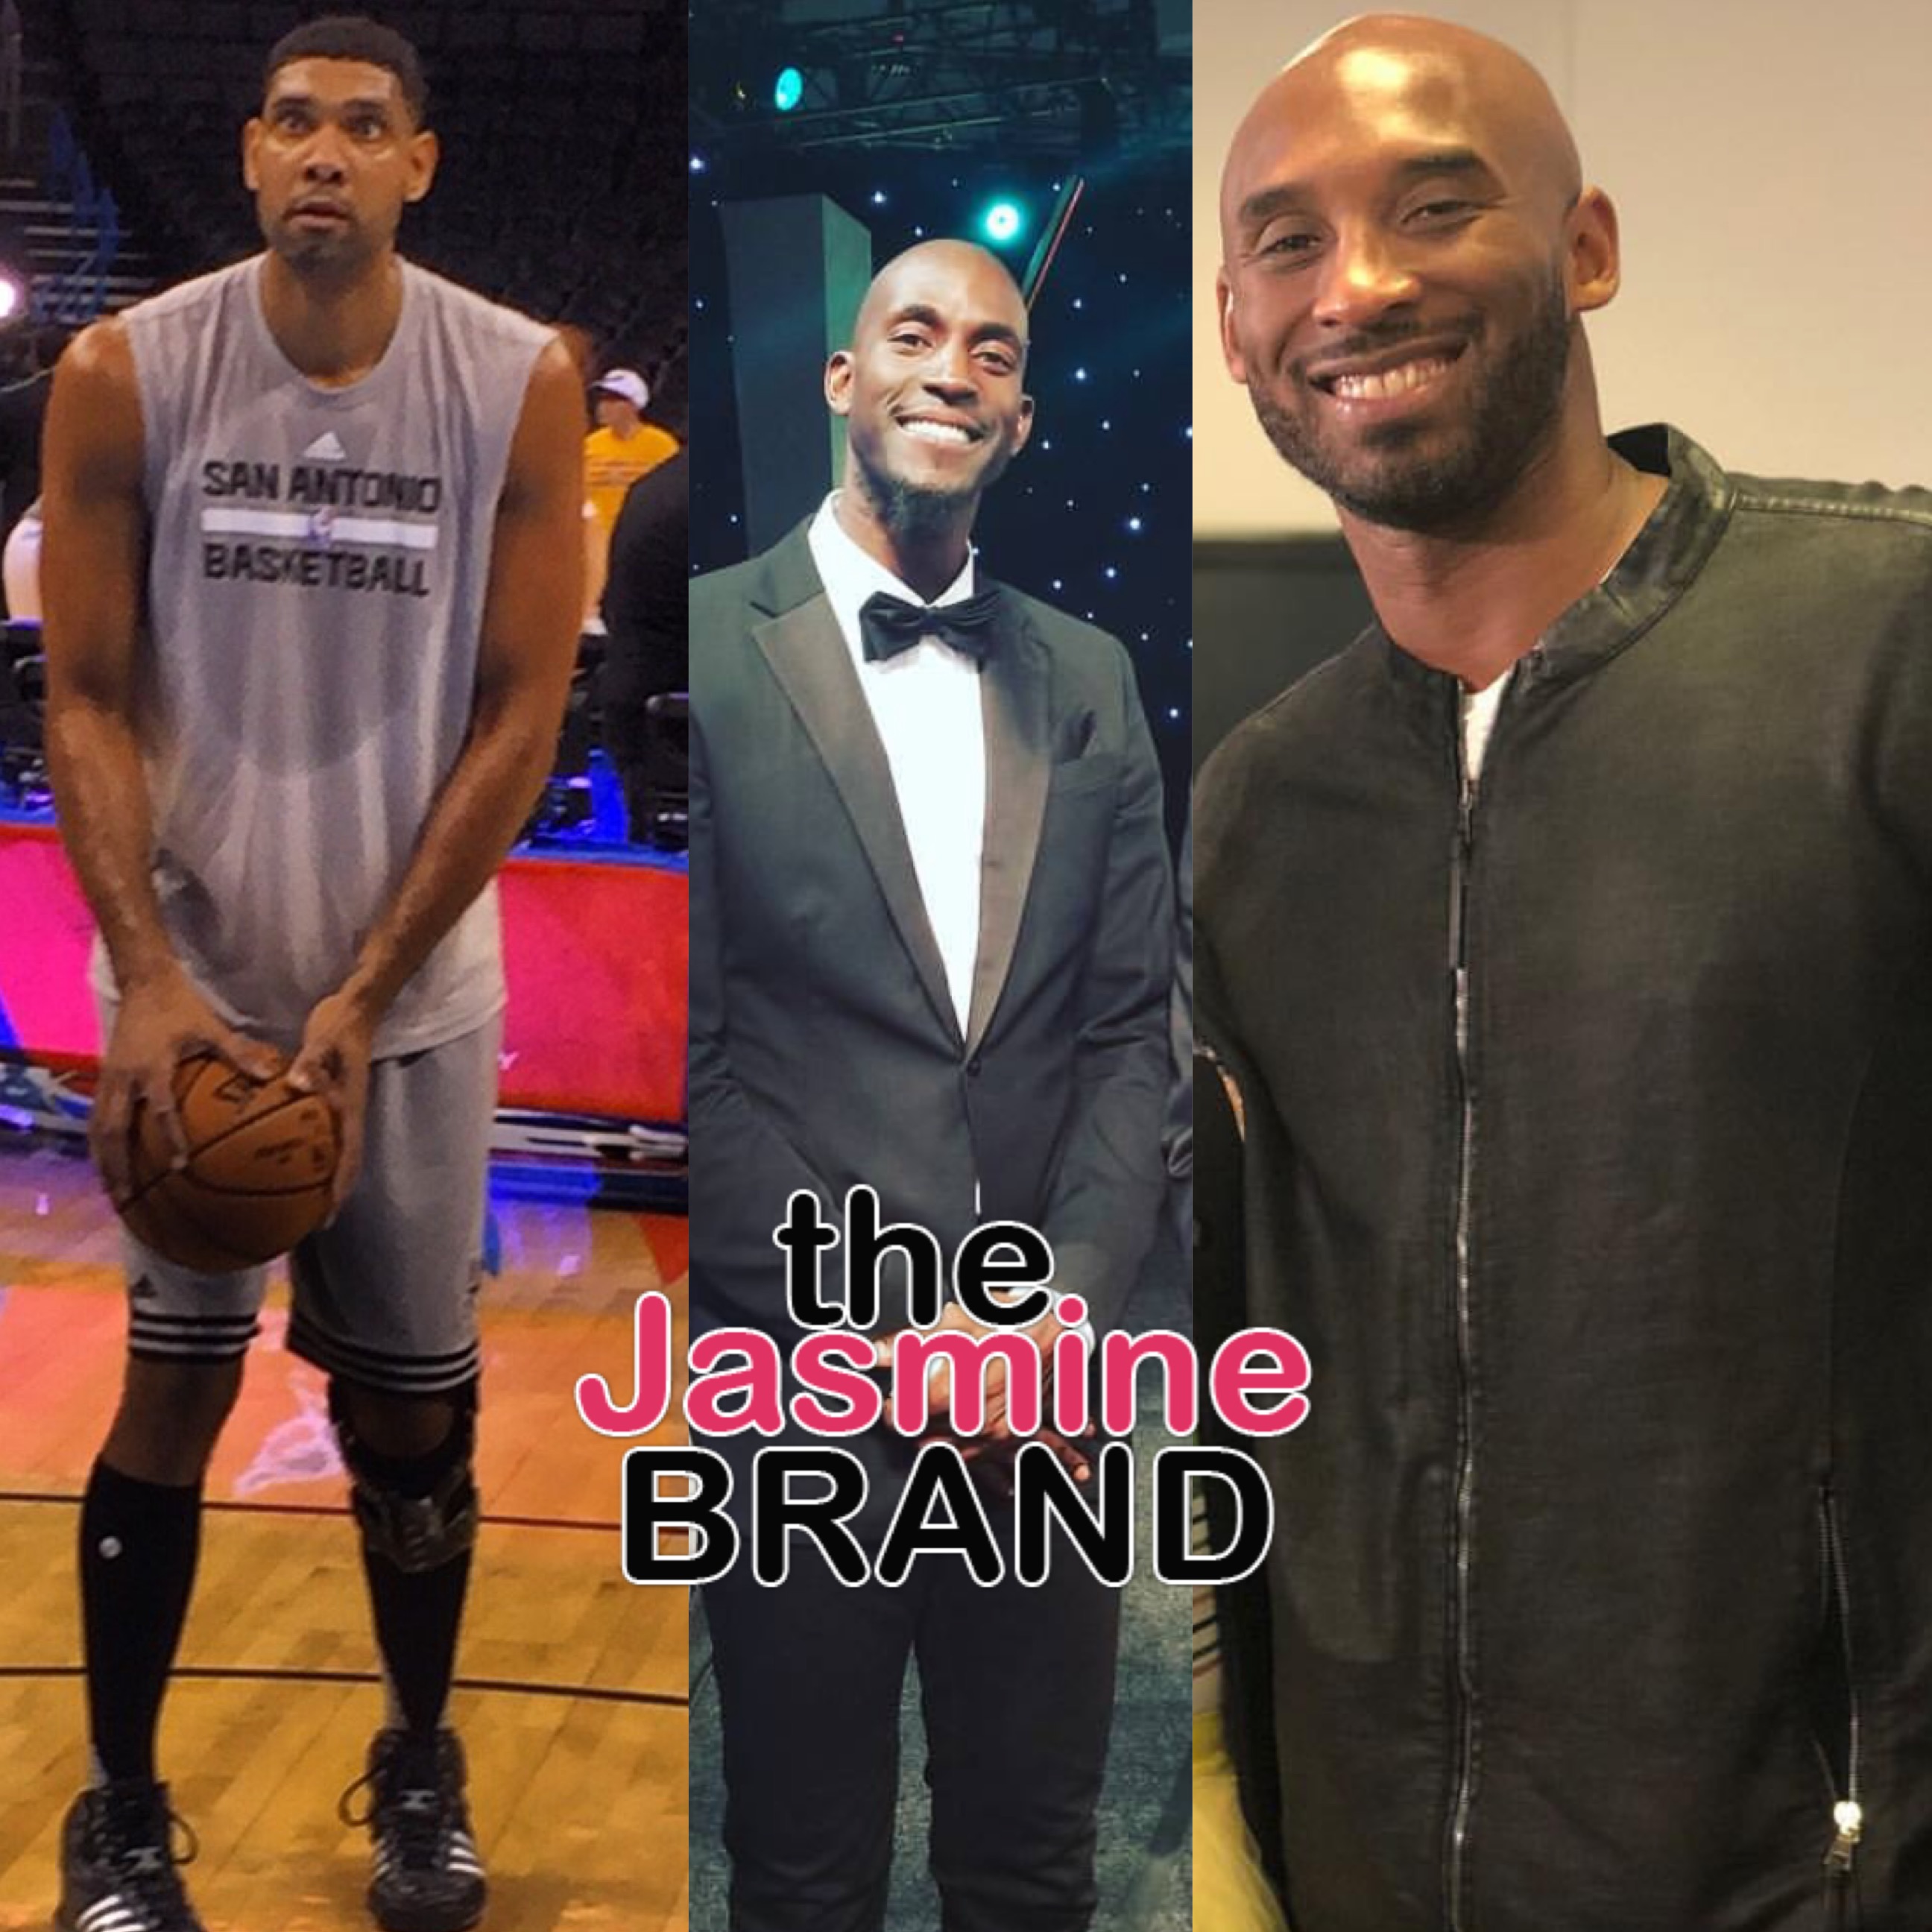 60 things to know about Kobe Bryant, Tim Duncan and Kevin Garnett